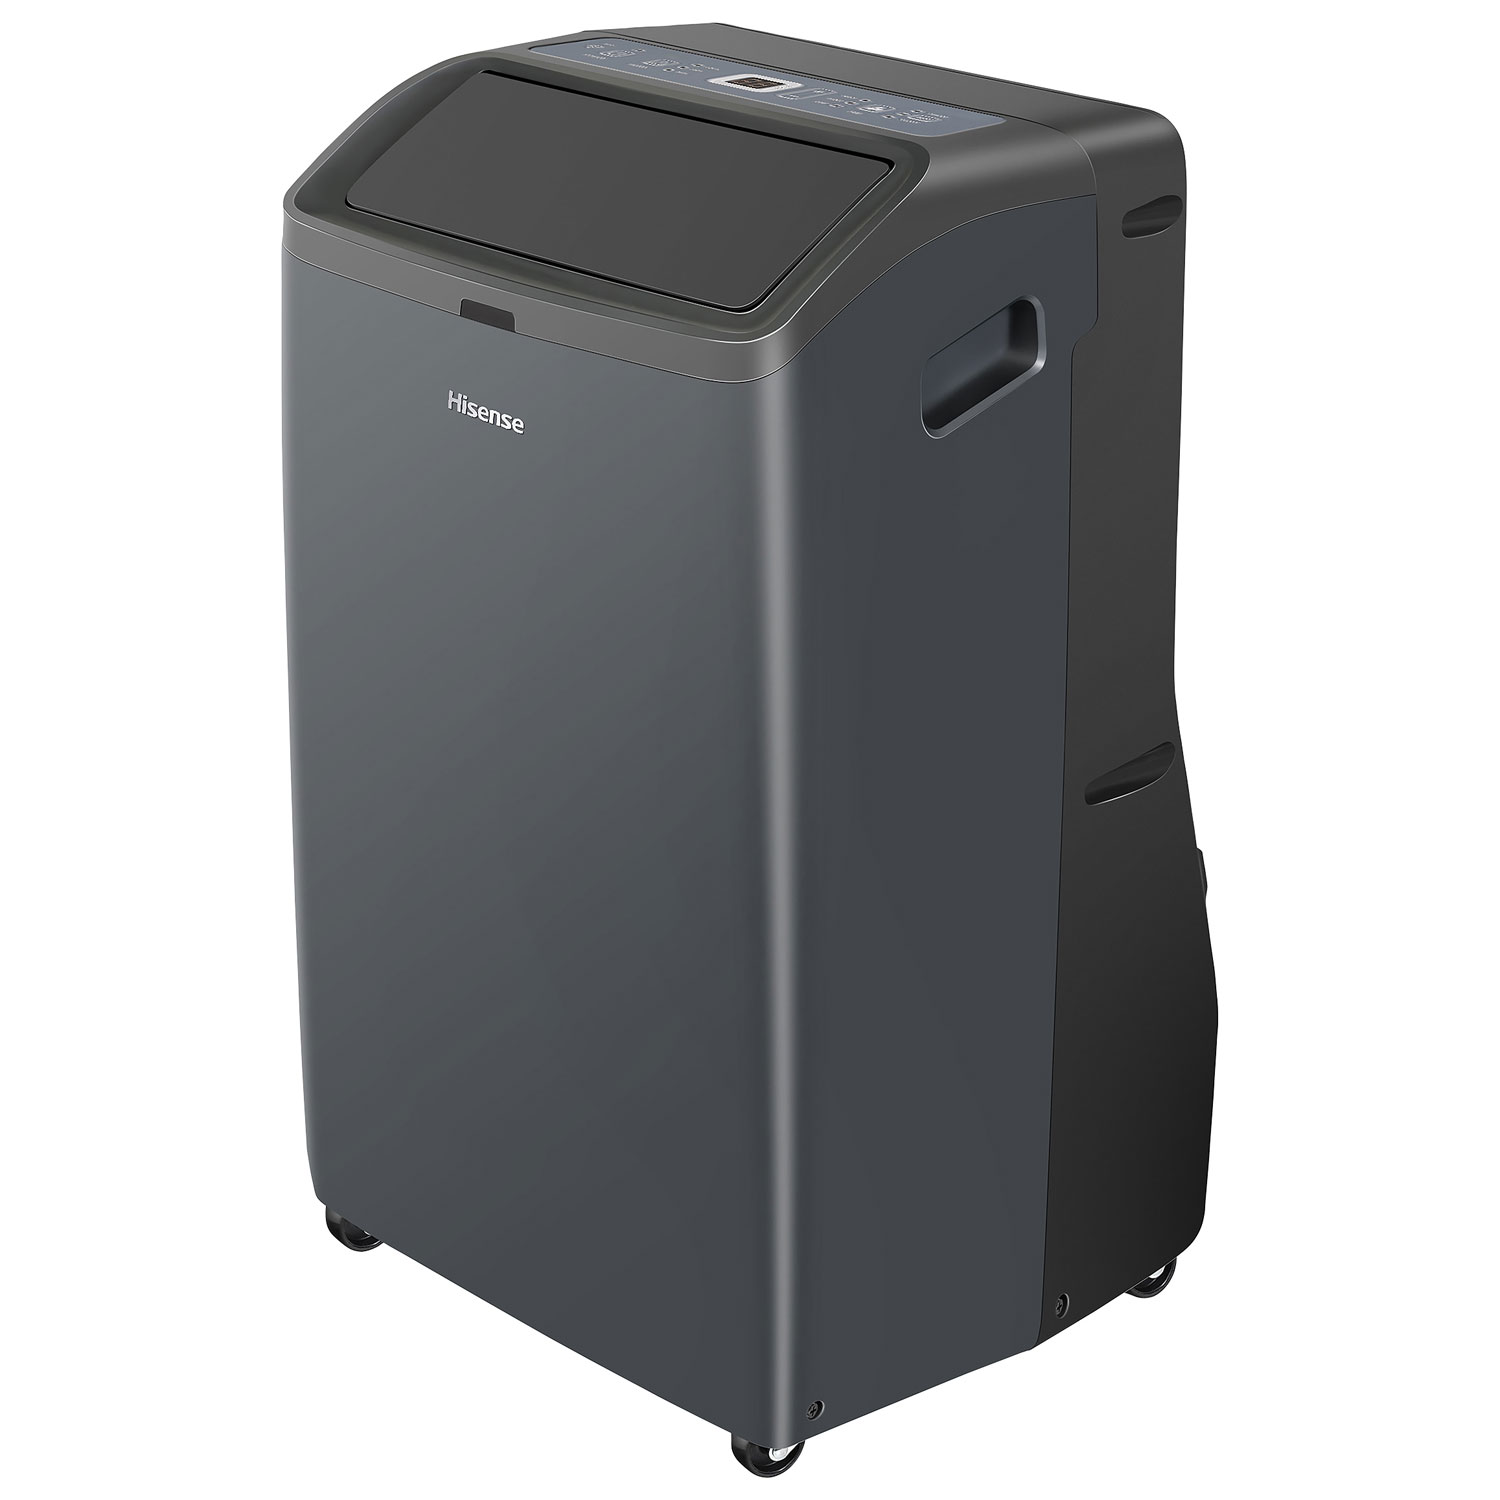 Hisense Smart 3-in-1 Portable Air Conditioner with Wi-Fi - 10000 BTU - Charcoal Grey